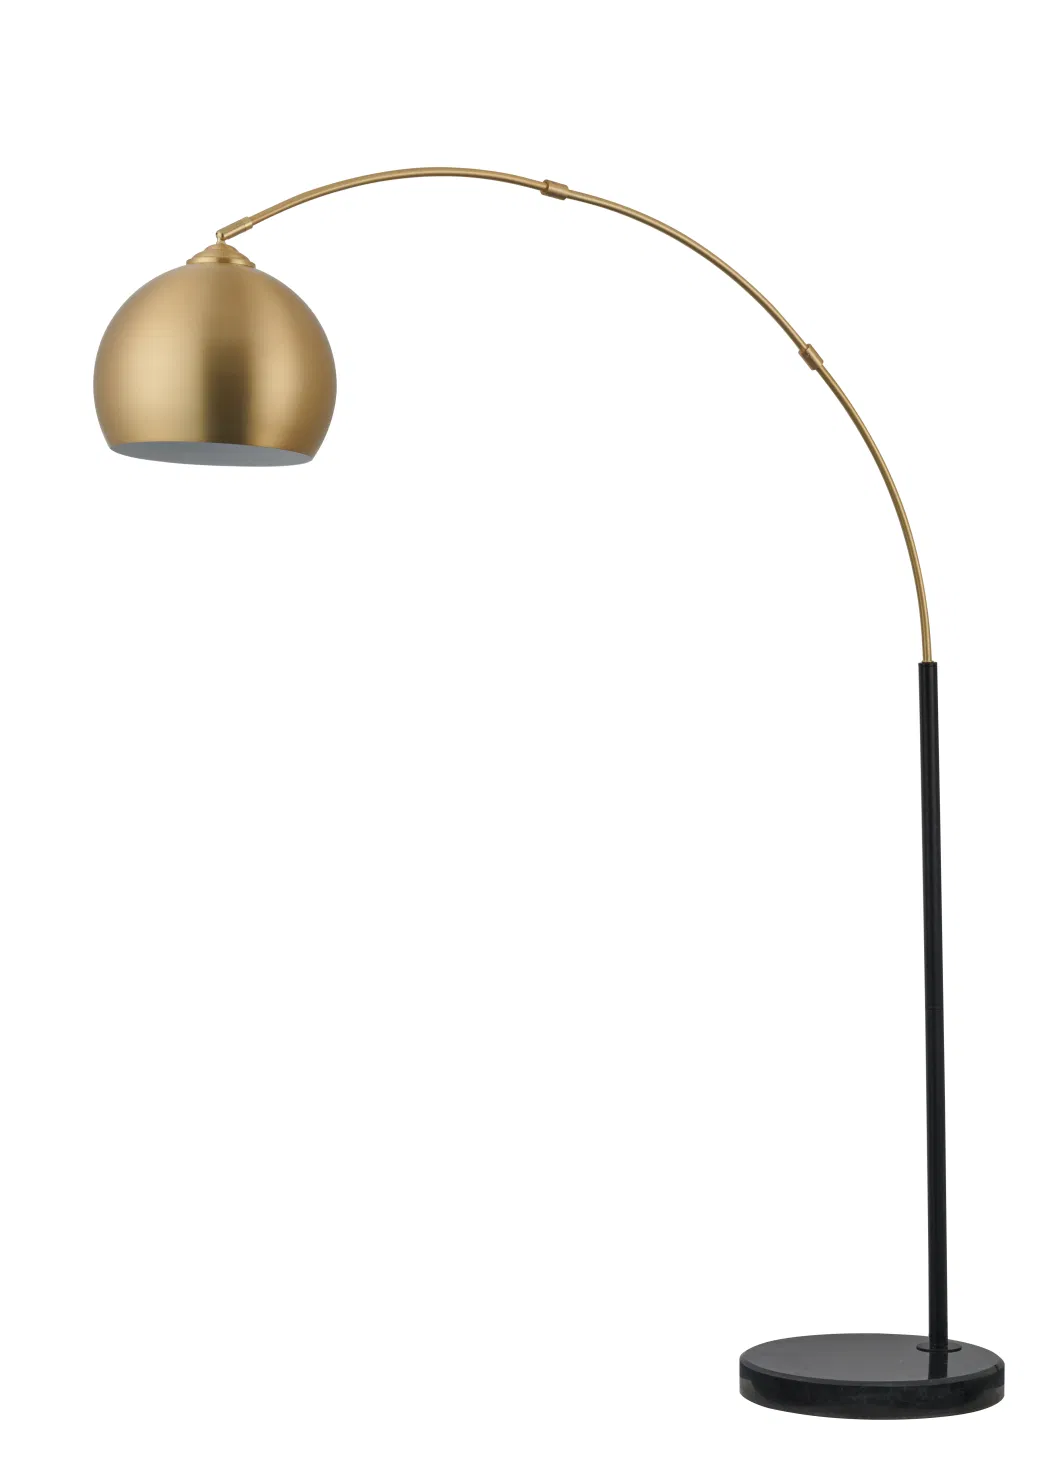 2 Color Bronze Metal Shade Stand Lamp, Fishing Light with Marble Base